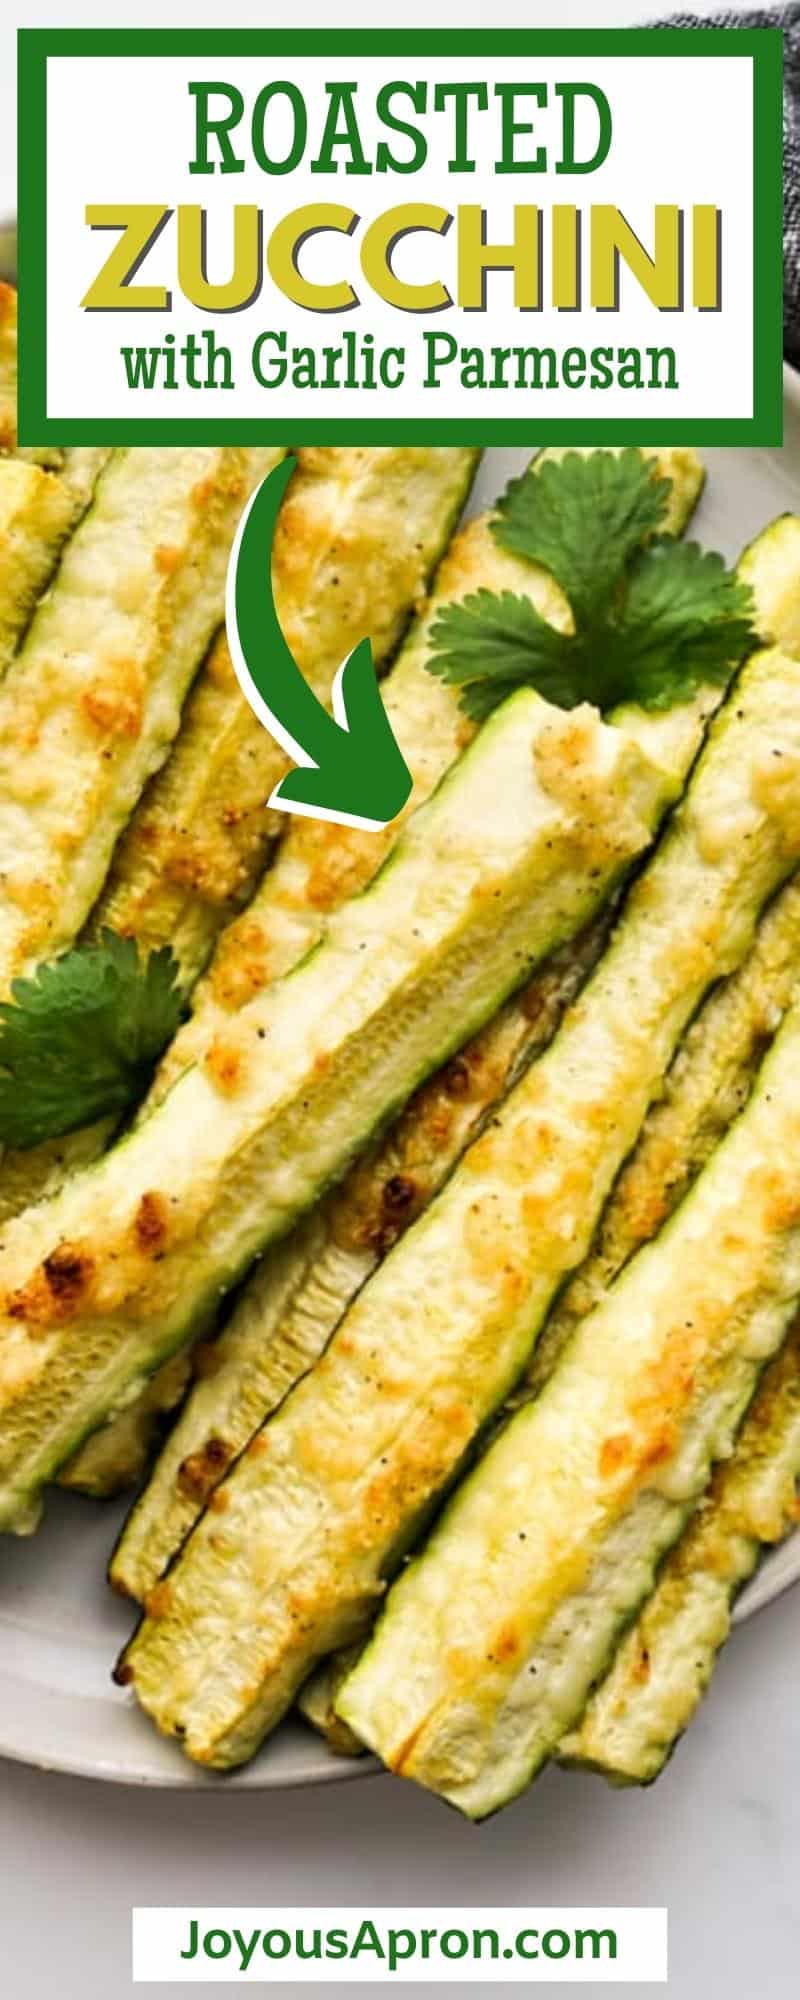 Roasted Zucchini - easy and yummy oven baked zucchini! Roasted zucchini is crispy on the outside, soft on the inside, and coated with garlic parmesan seasoning. The perfect healthy side dish for any meal! via @joyousapron